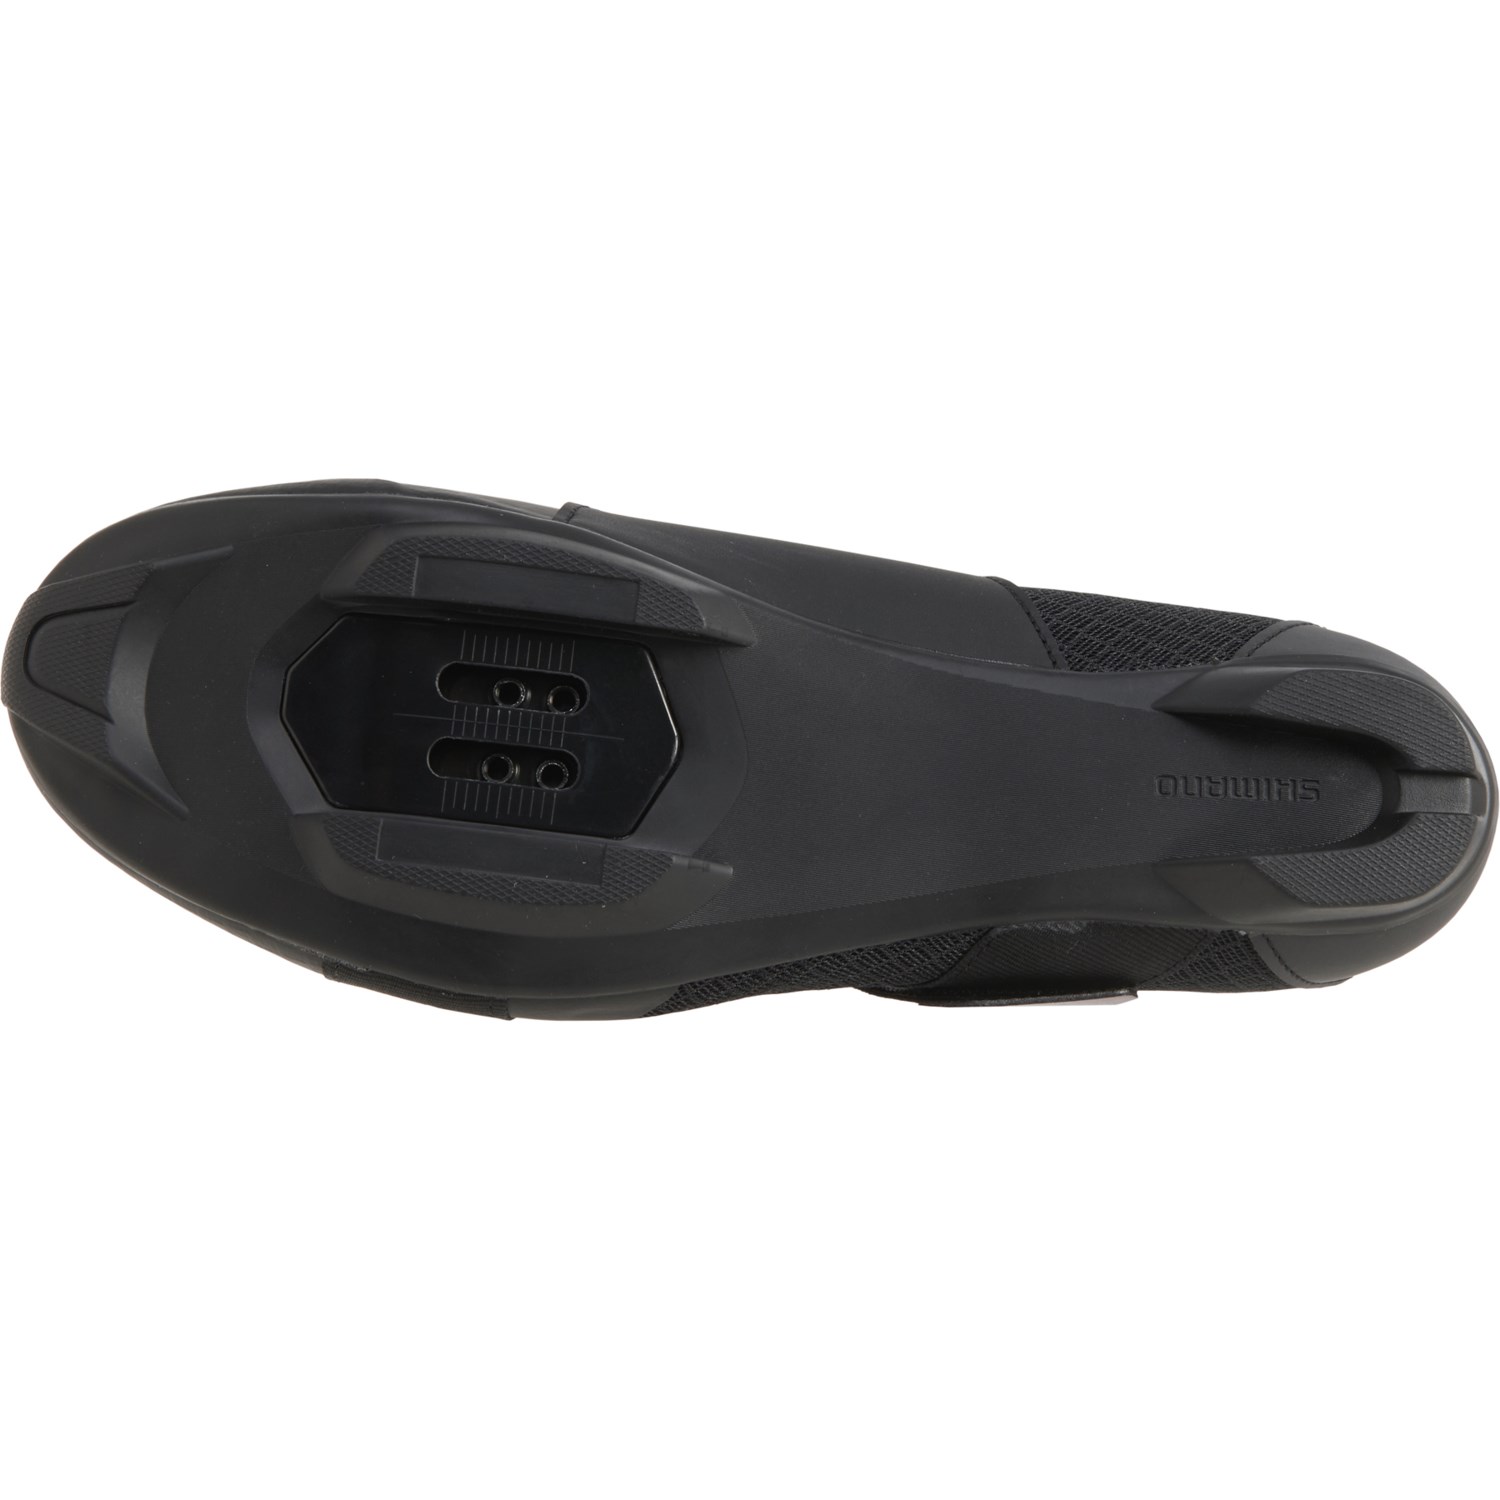 Shimano SH-IC200 Indoor Cycling Shoes (For Men and Women) - Save 80%